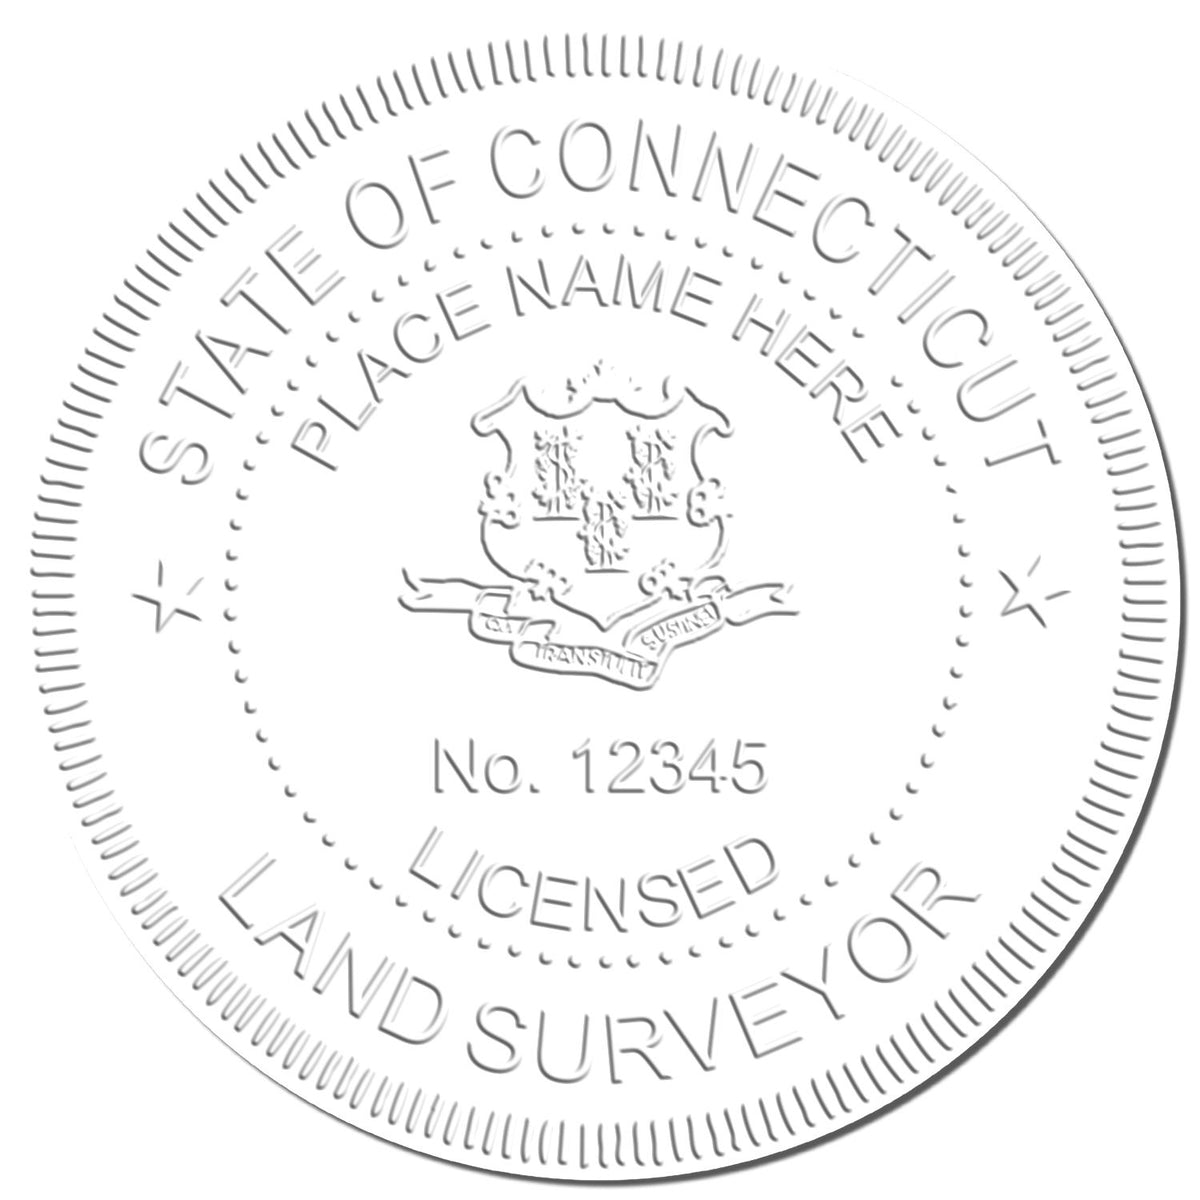 This paper is stamped with a sample imprint of the Extended Long Reach Connecticut Surveyor Embosser, signifying its quality and reliability.